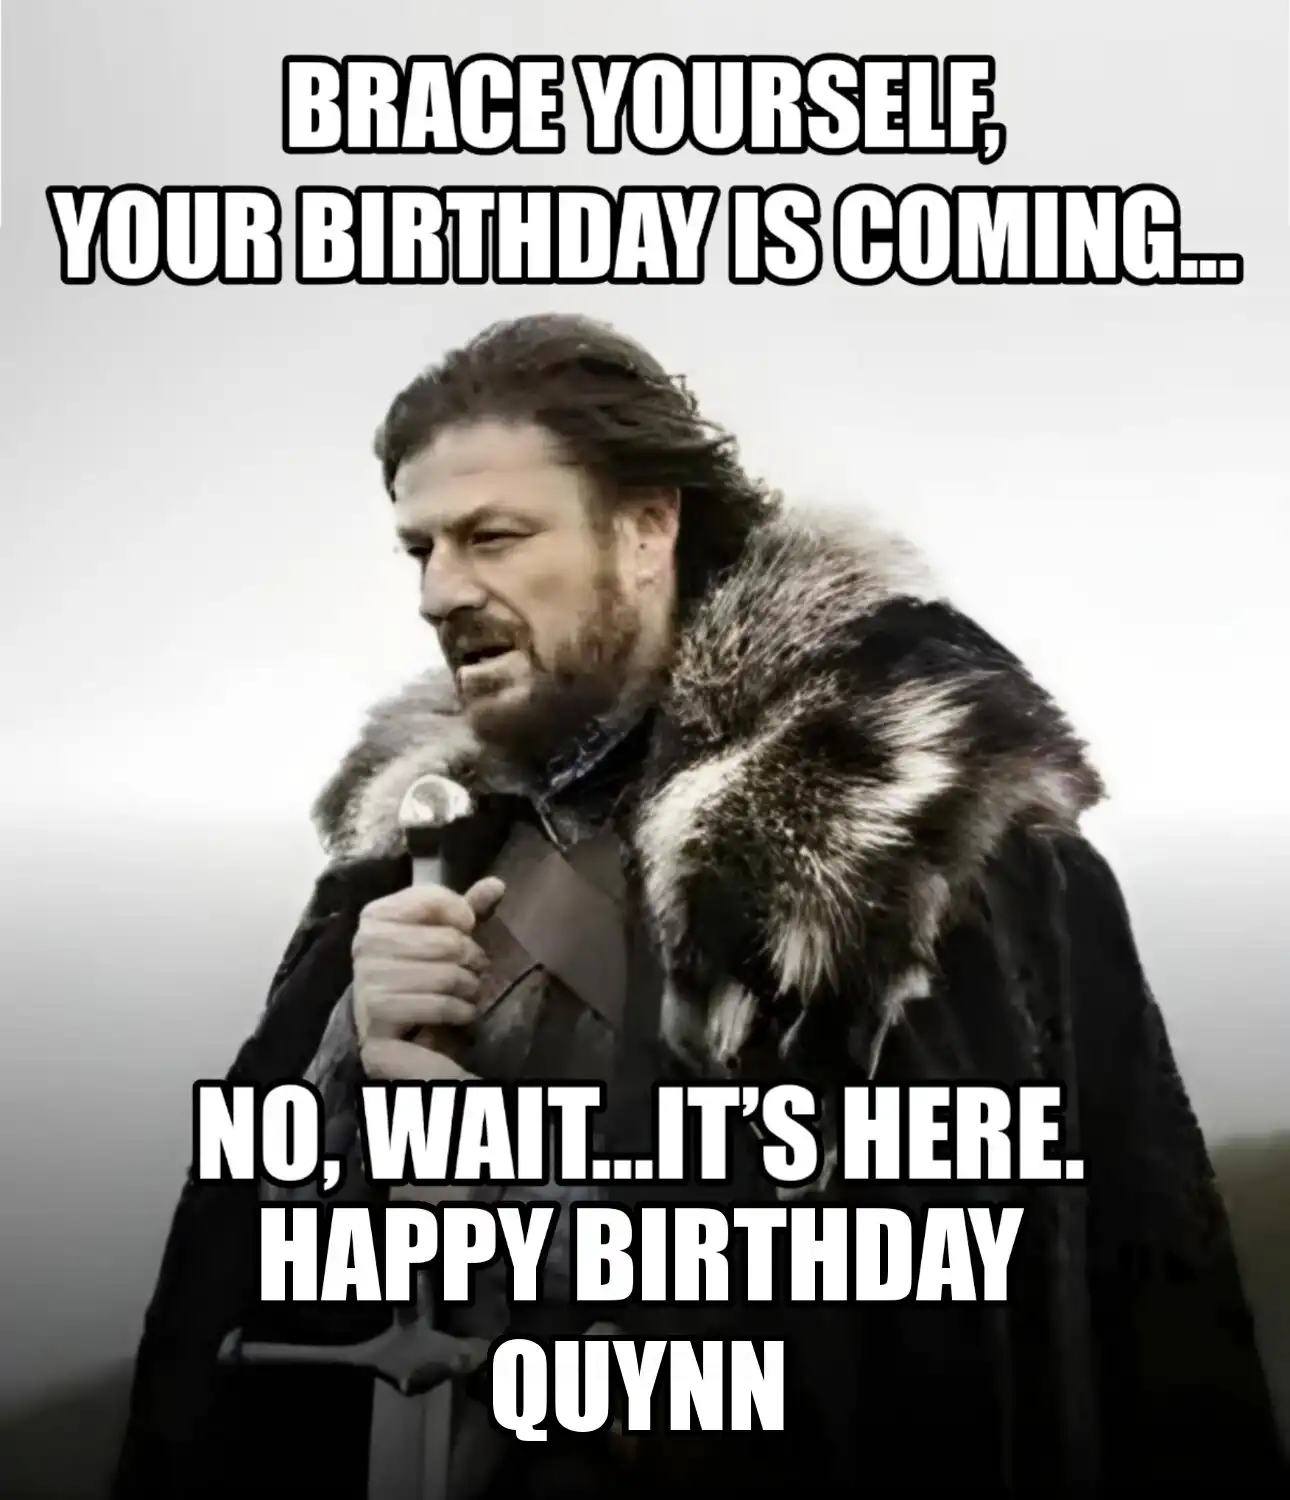 Happy Birthday Quynn Brace Yourself Your Birthday Is Coming Meme